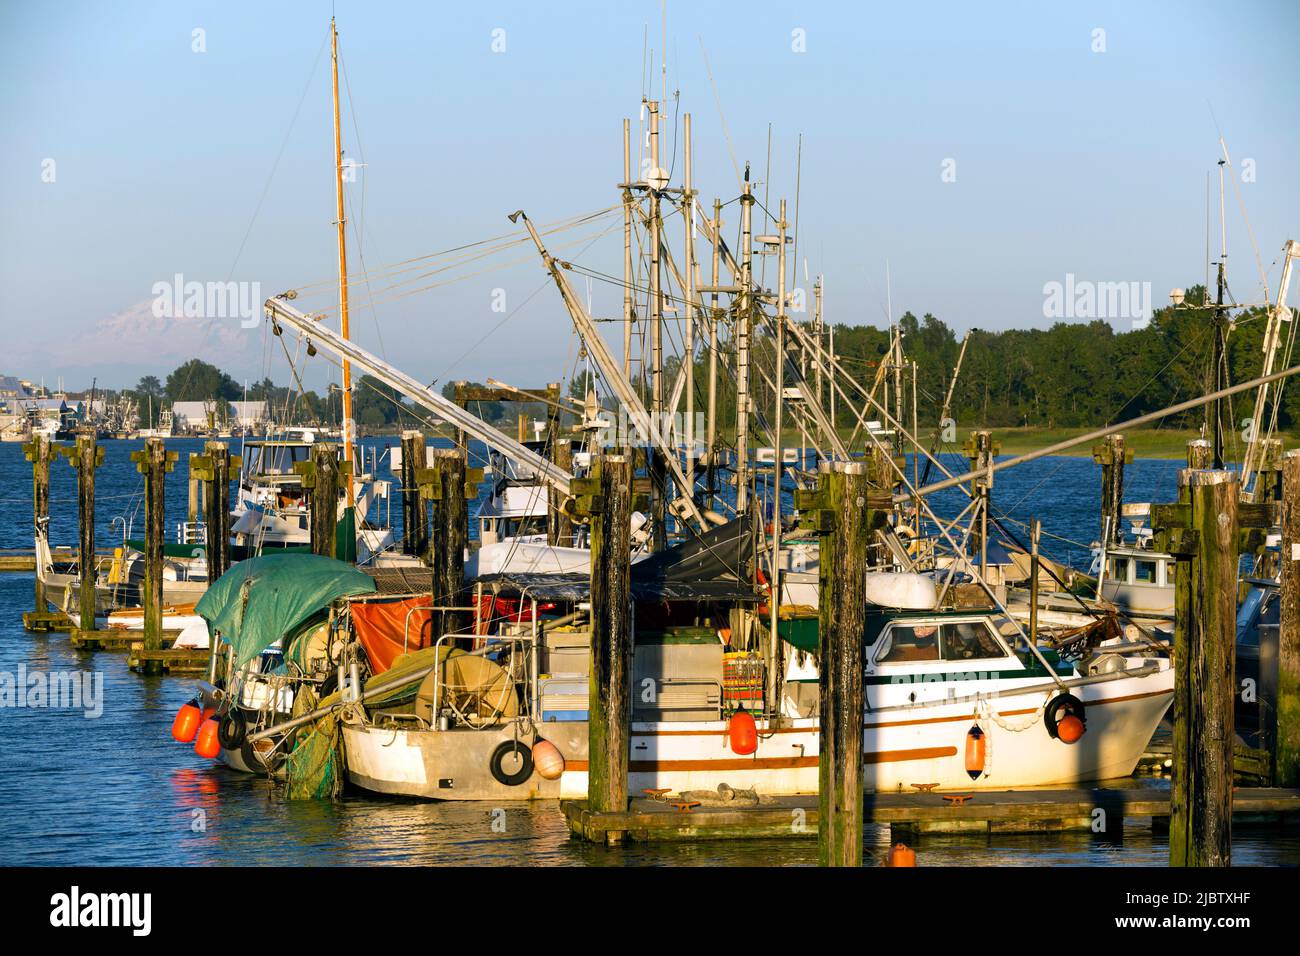 Steveston was originally a small town founded in 1880 by William Herbert Steves near Vancouver, British Columbia. It has since been absorbed into the Stock Photo